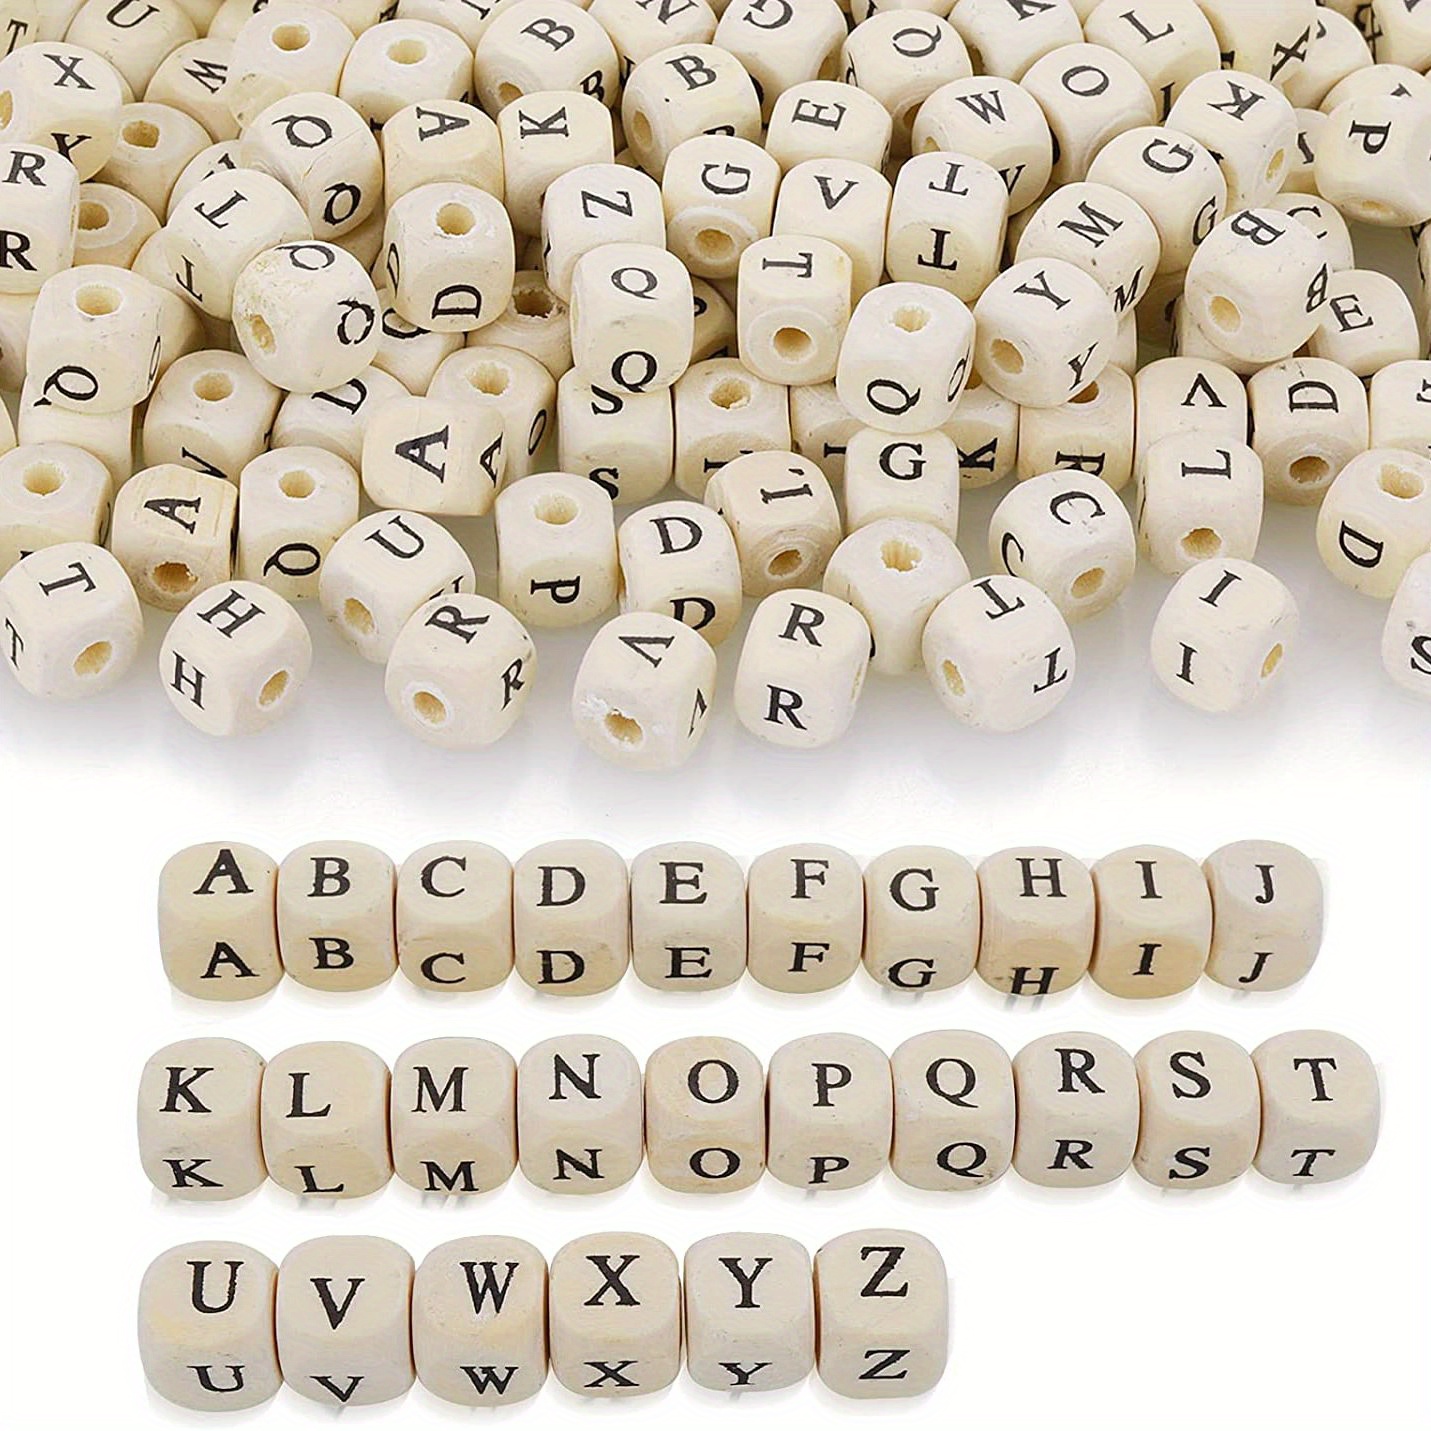 200pcs/lot 5mm Cube Mix Letter Beads Square Russian Alphabet Beads For Jewelry  Making Handmade Diy